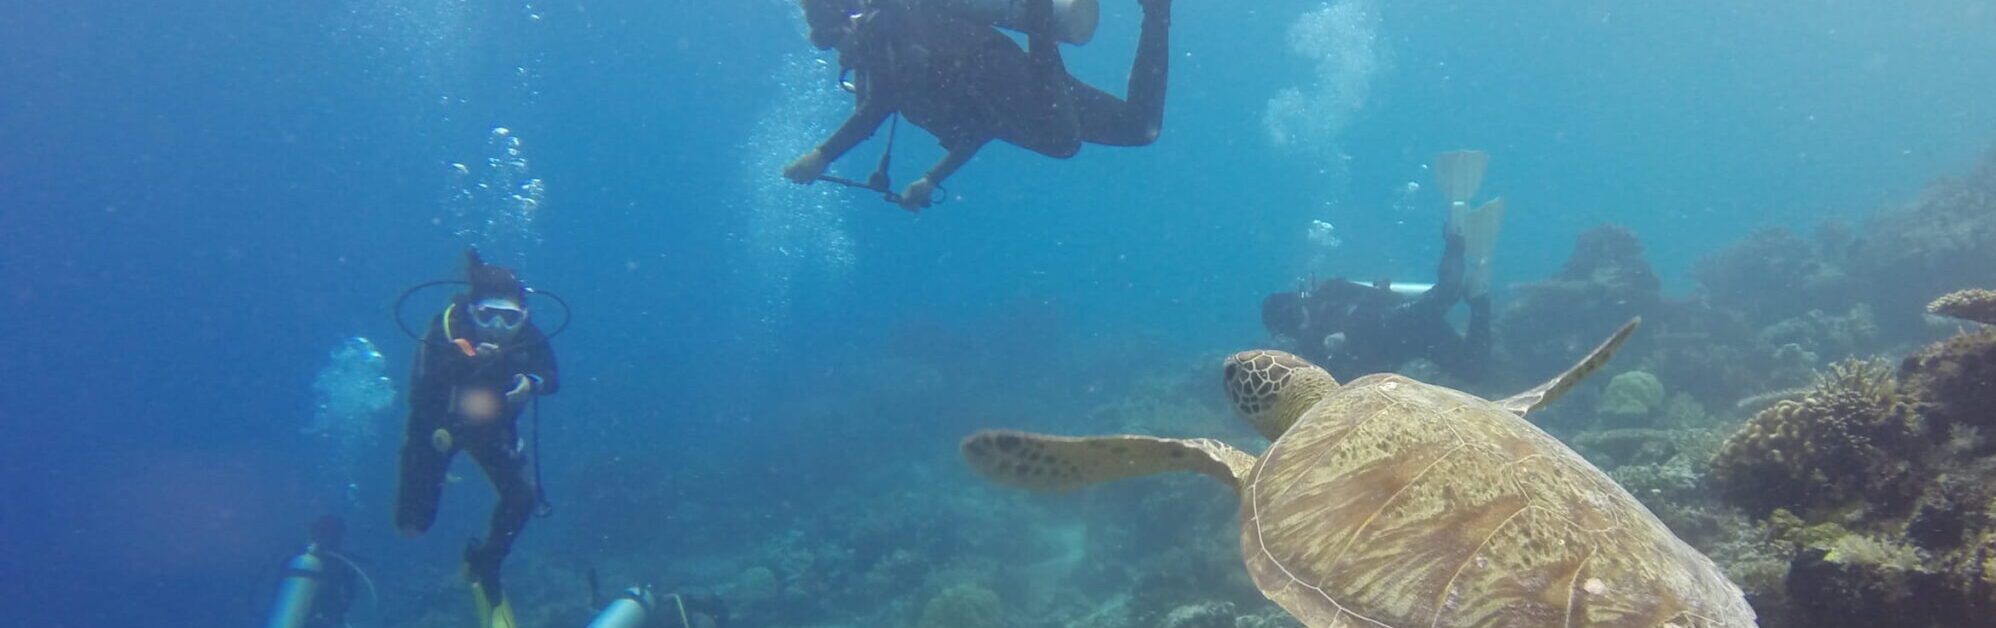 Scuba divers swimming in the water with a turtle in Oahu Hawaii